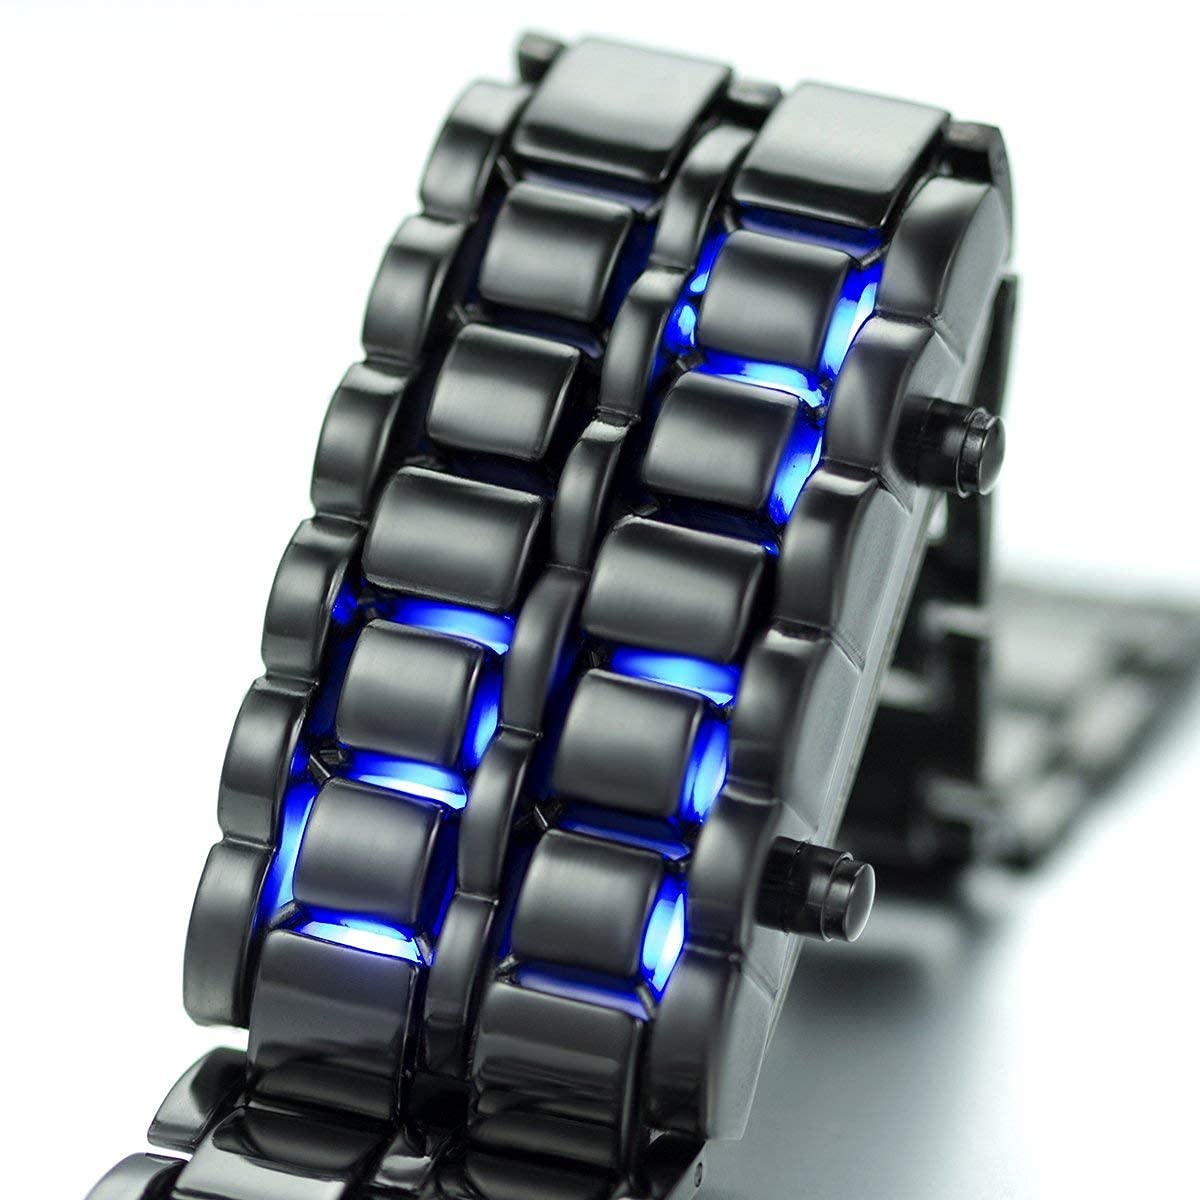 BESTKANG Luxury Men’s and Women's Stainless Steel Bracelet Watches Blue LED Lamp Black Volcanic Lava Style Fashion Casual Sports Watch